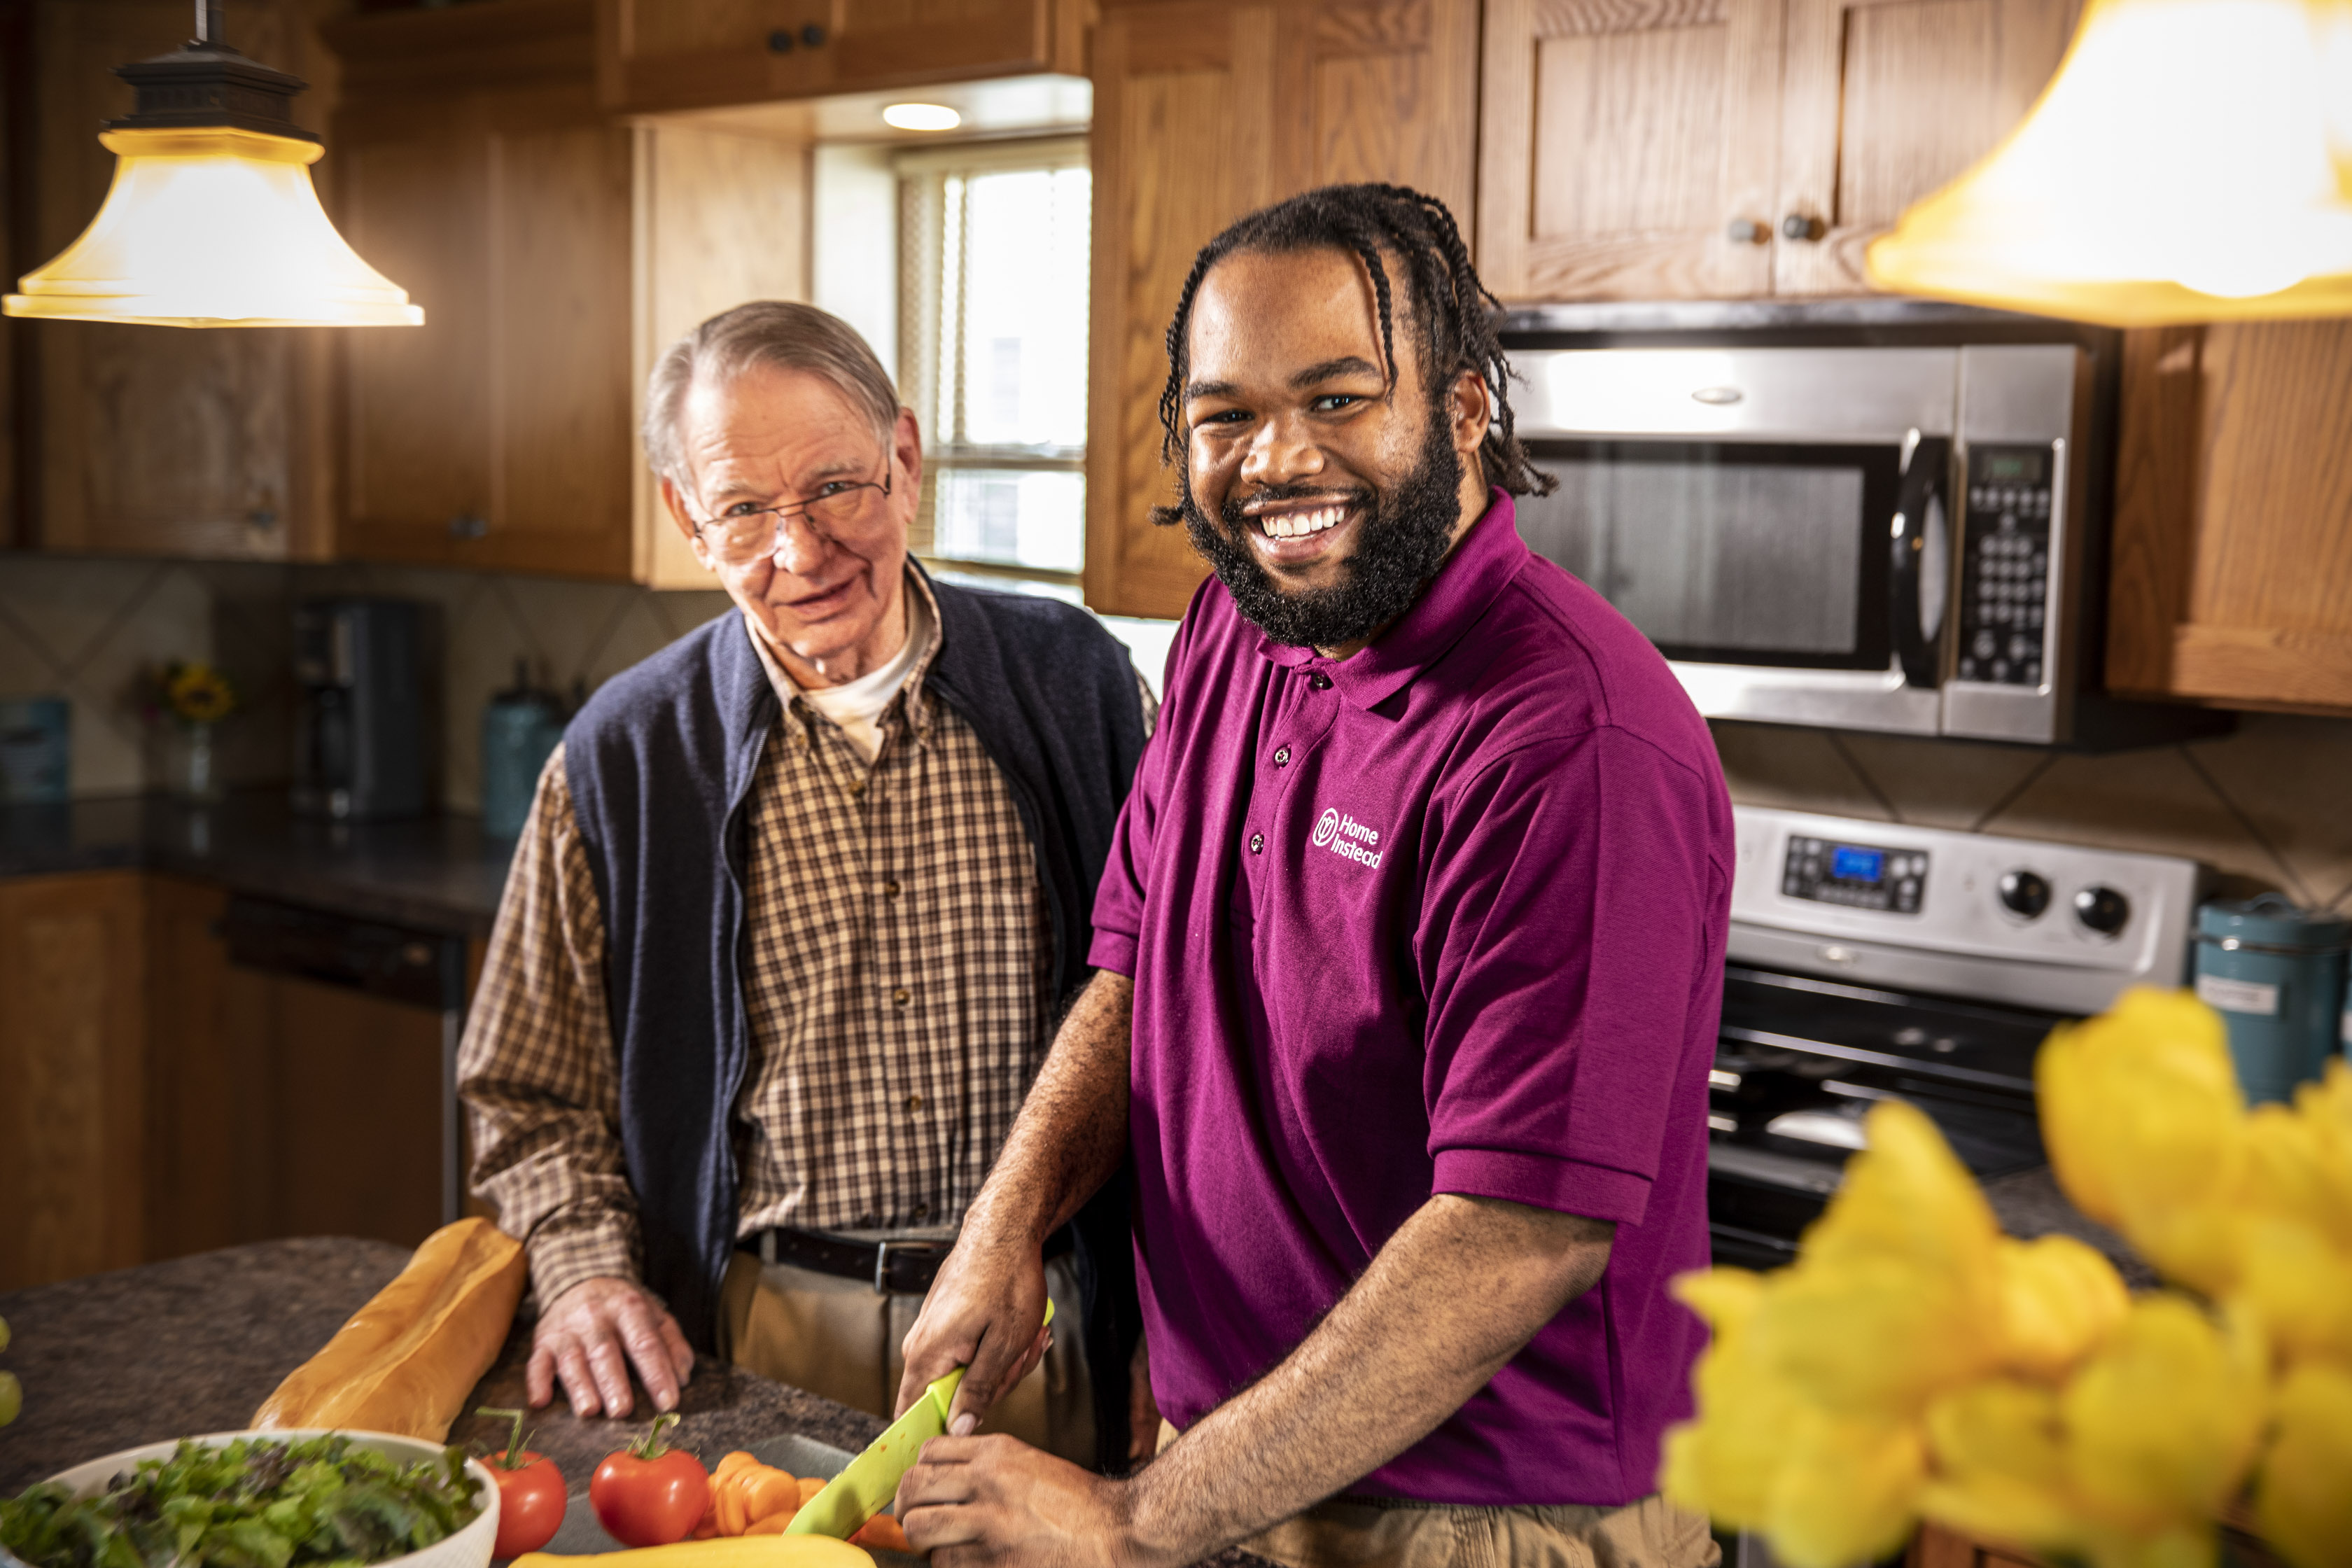 Home Instead Caregiver and Client cooking in the kitchen